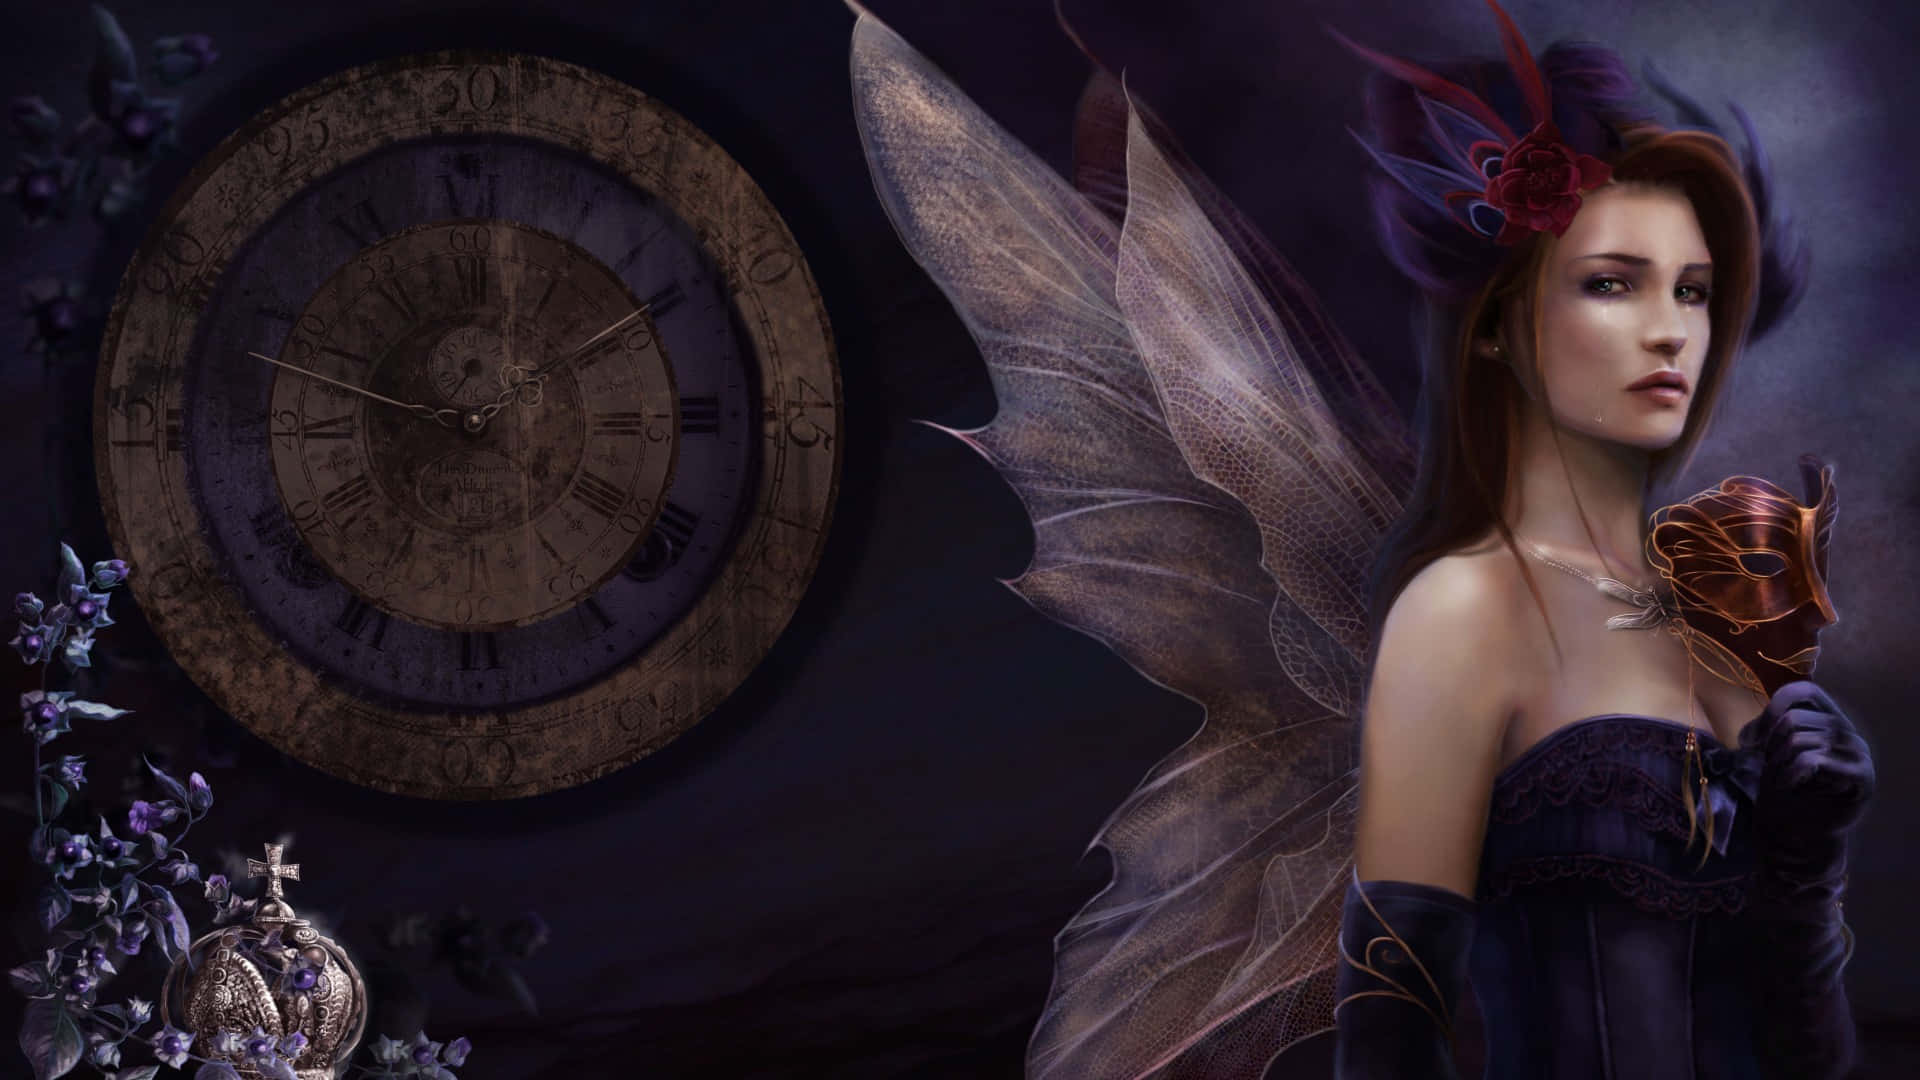 Step into the dark side with an Evil Fairy Wallpaper